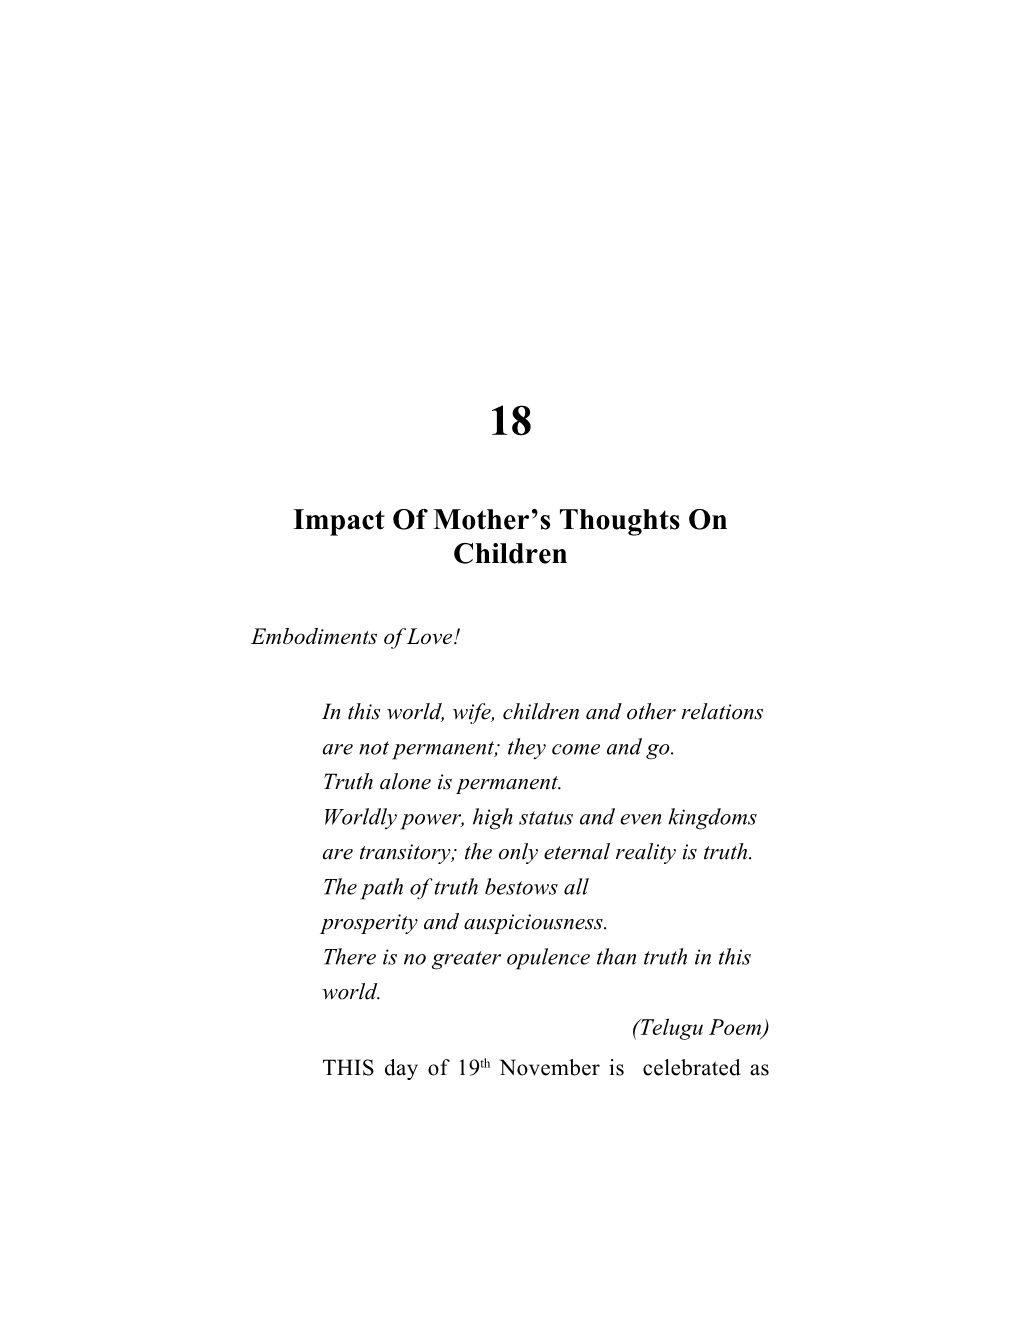 Impact of Mother's Thoughts on Children